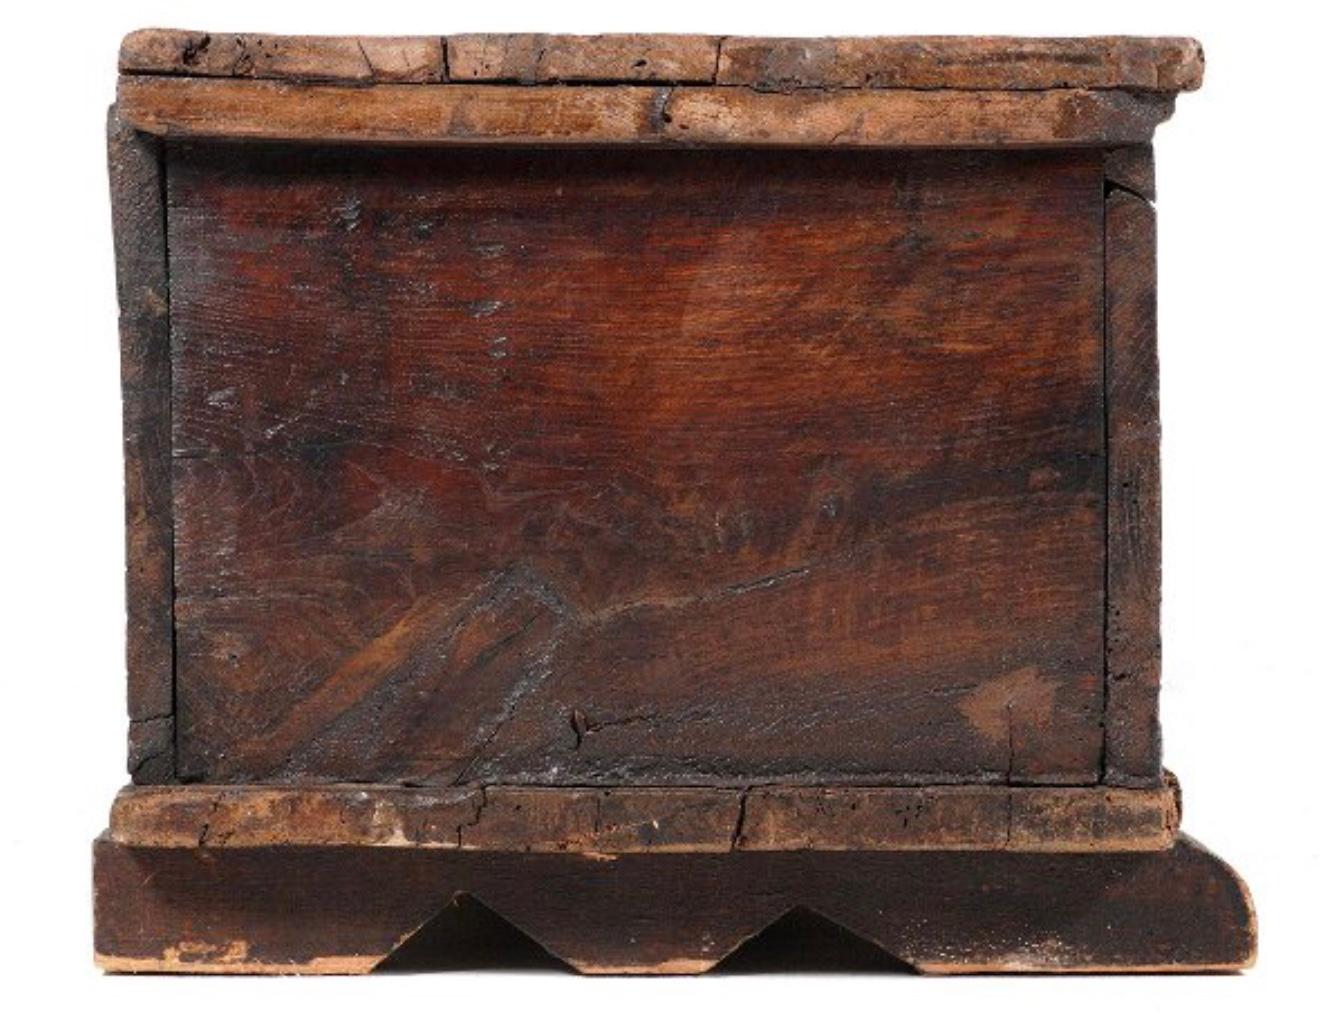 17th Century French Gothic carved trunk. Intricately carved early-17th century Gothic style coffer. This small trunk, having its original hand wrought iron hardware, with a thick and solid carved lift top with beveled edges, and typical relief